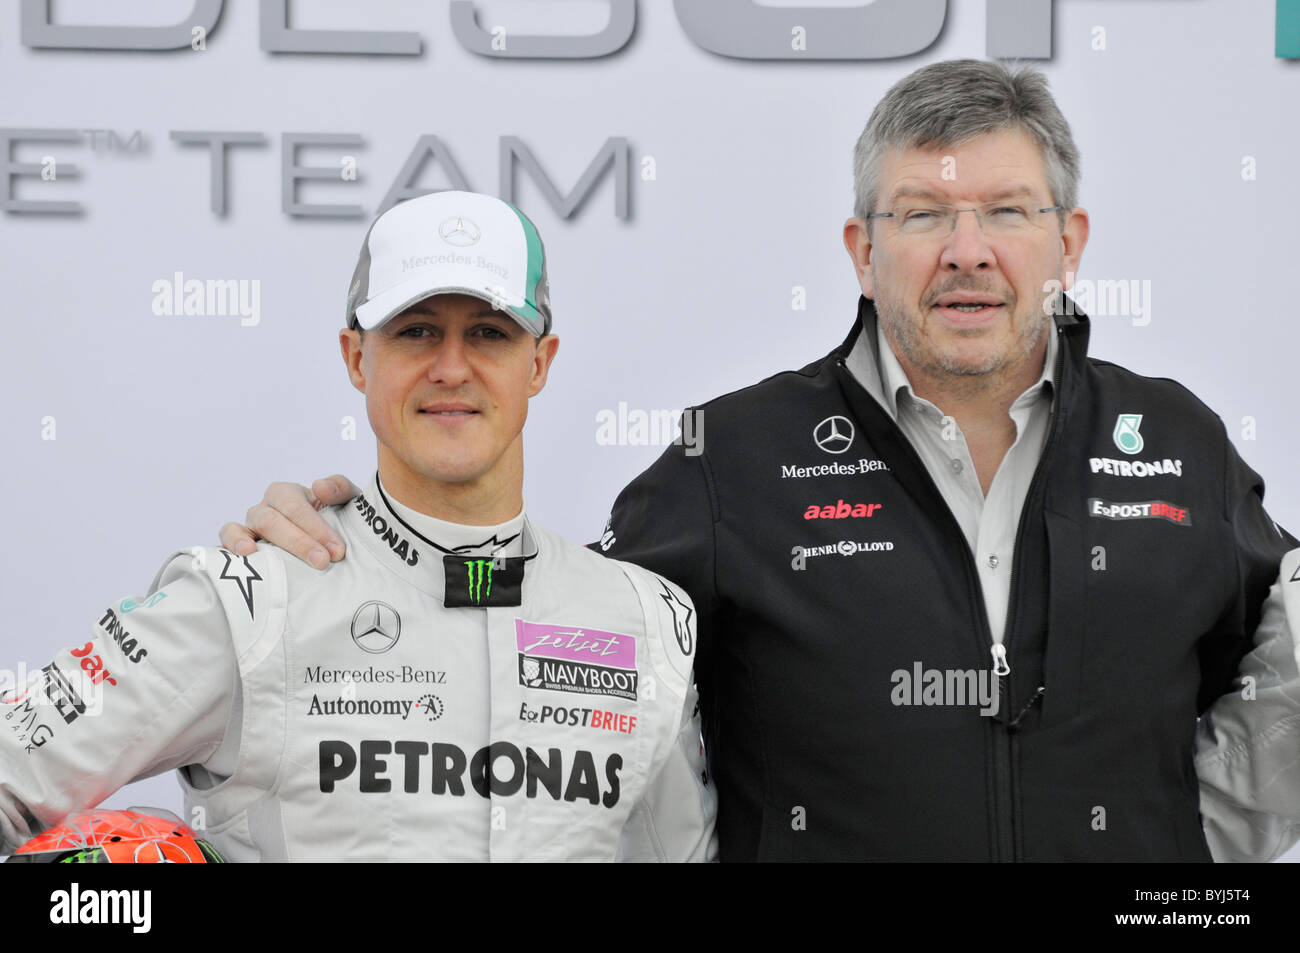 driver Michael Schumacher (GER,left) and Ross Brawn (GBR), team principal and co-owner, both Mercedes GP Formula One team Stock Photo